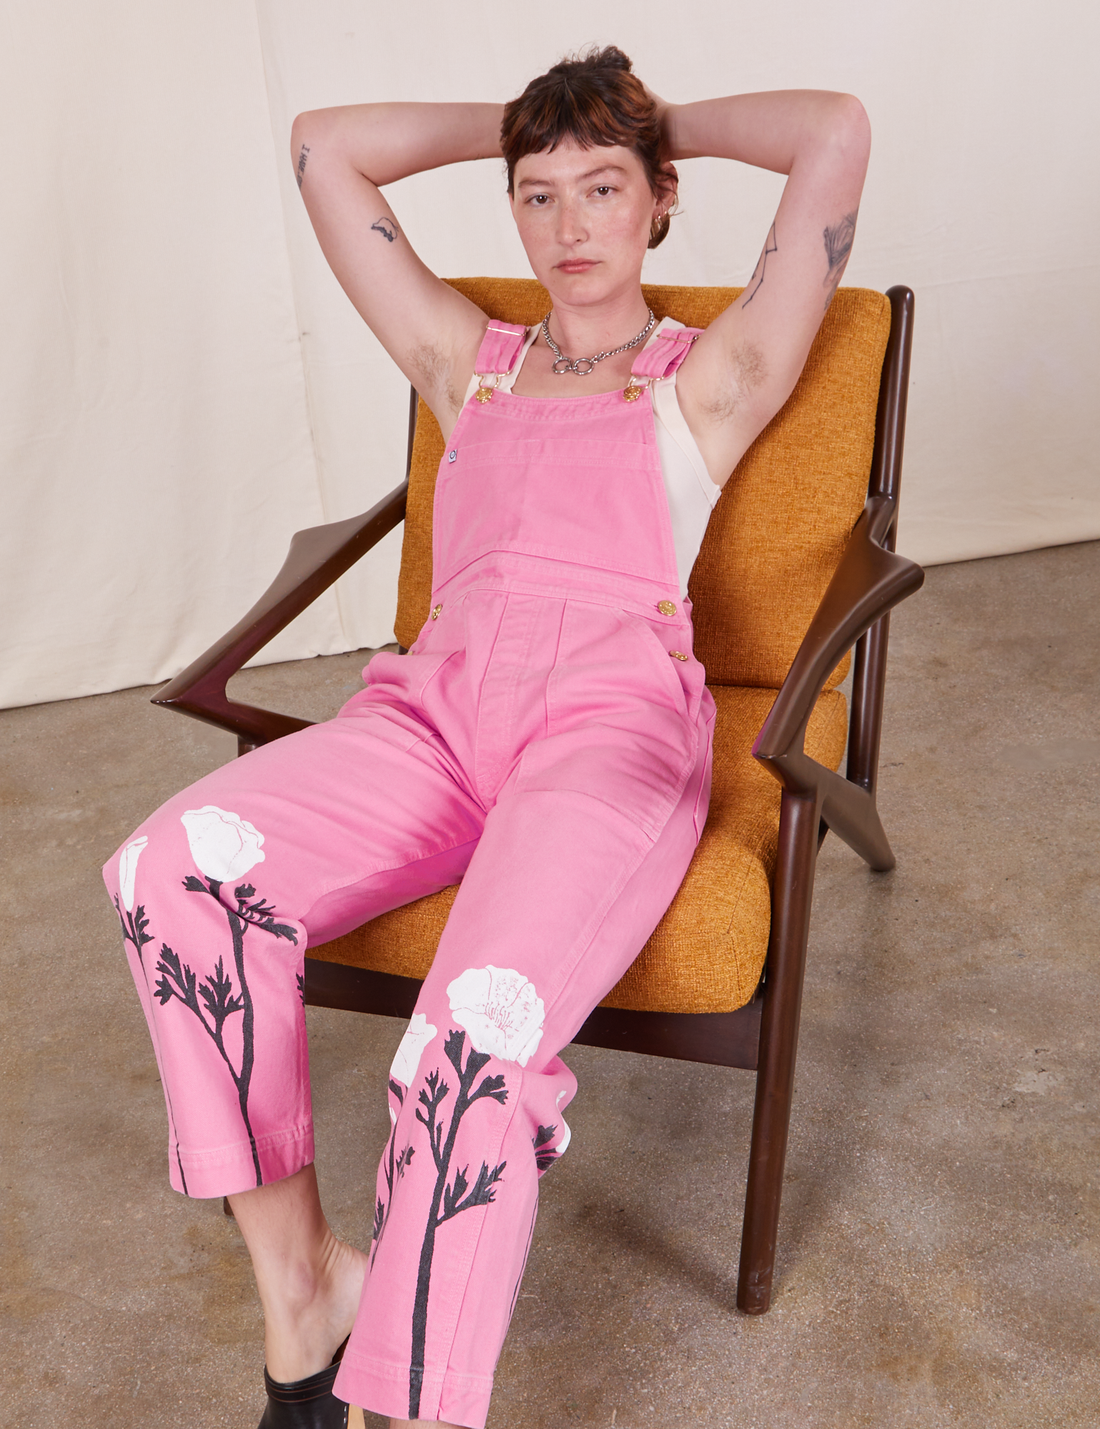 Alex is sitting on a vintage wooden chair with orange upholstery. She is wearing California Poppy Overalls in Bubblegum Pink and a vintage off-white Tank Top underneath.